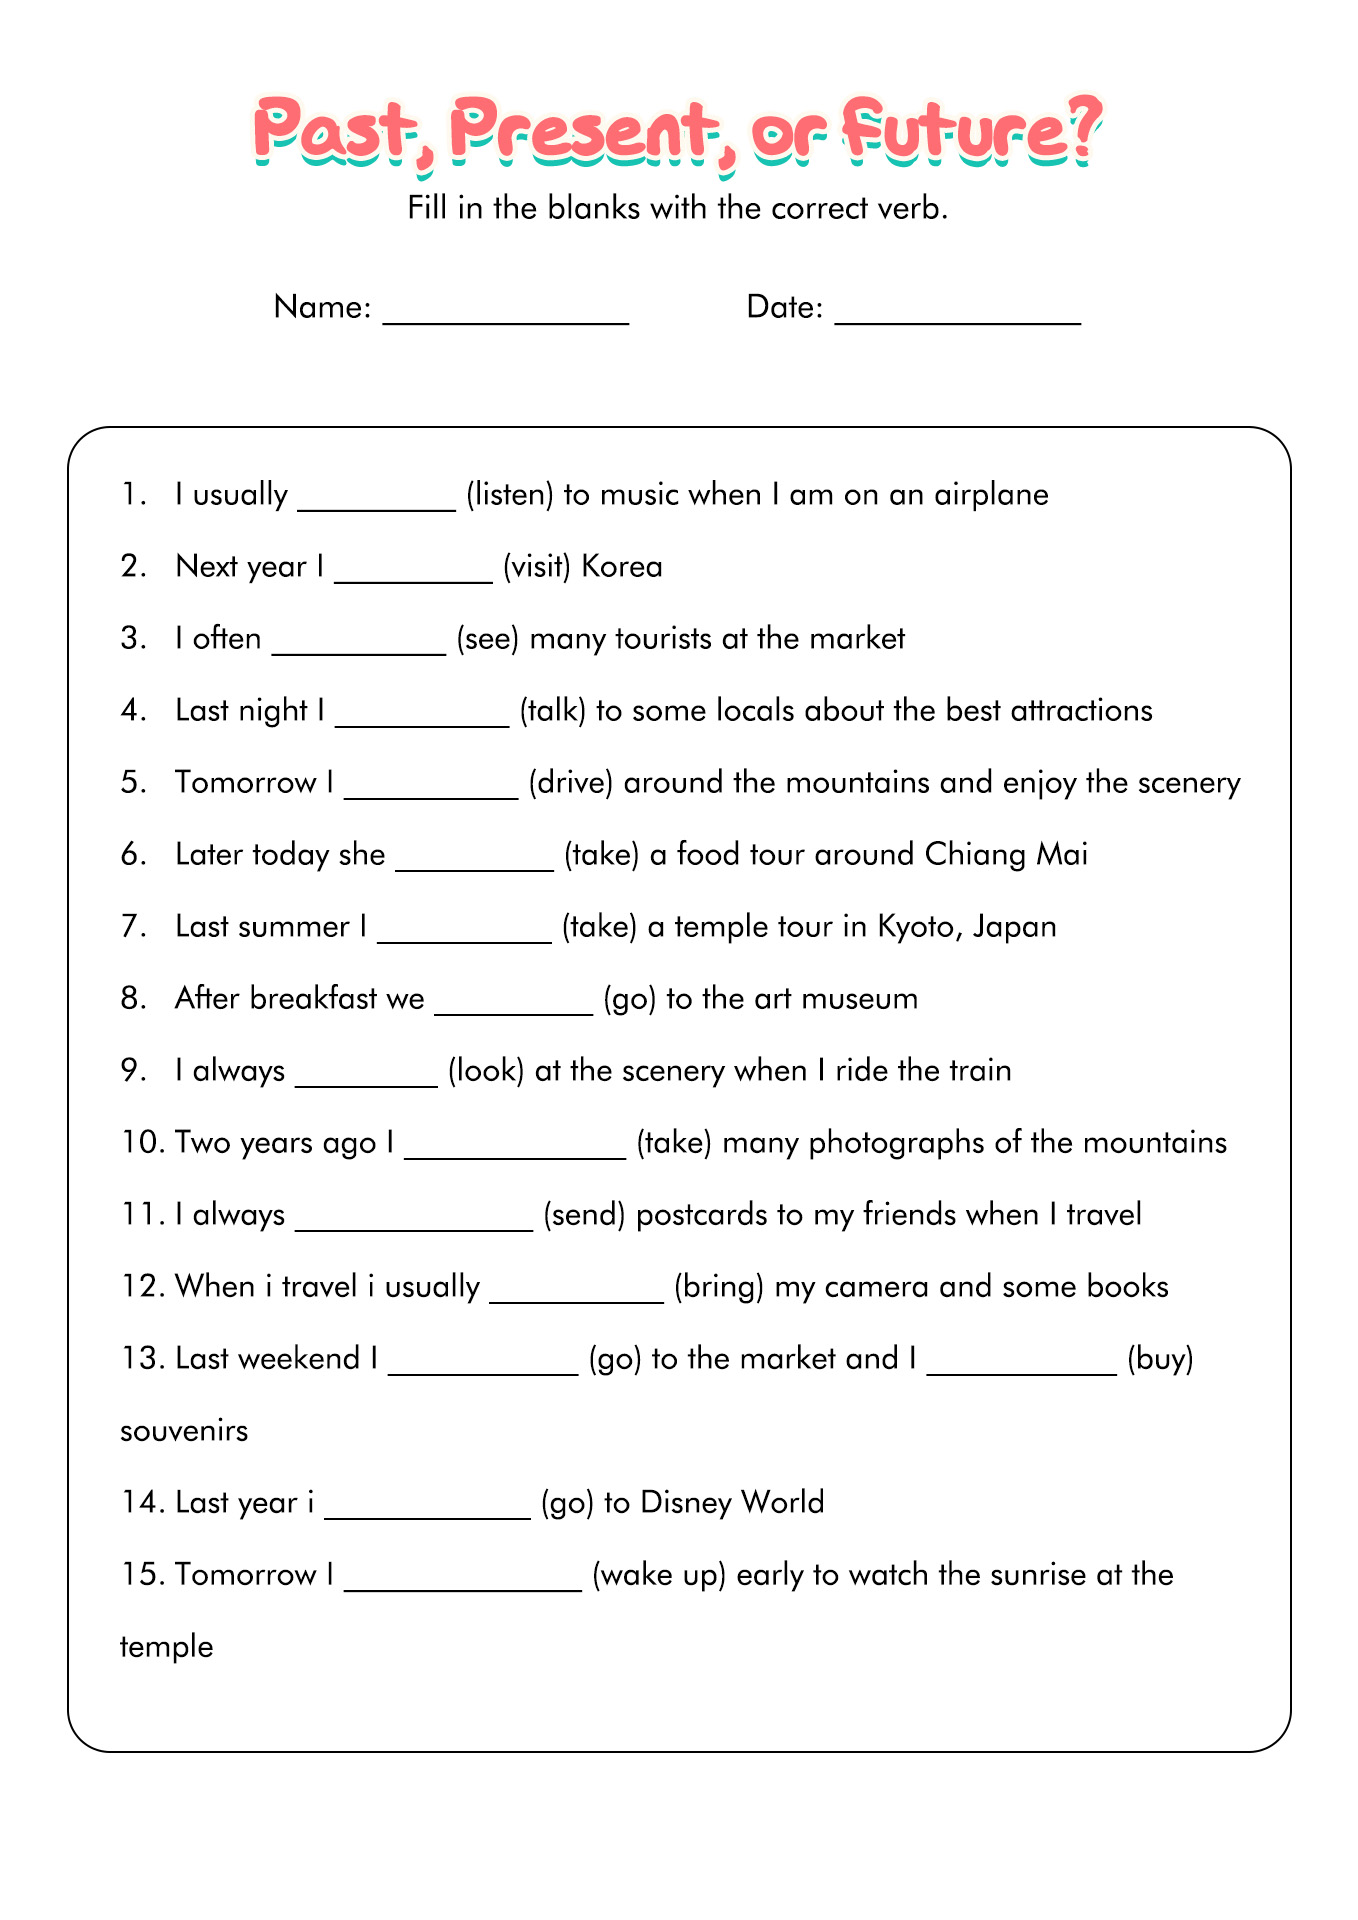 Past Present and Future Tense Worksheets